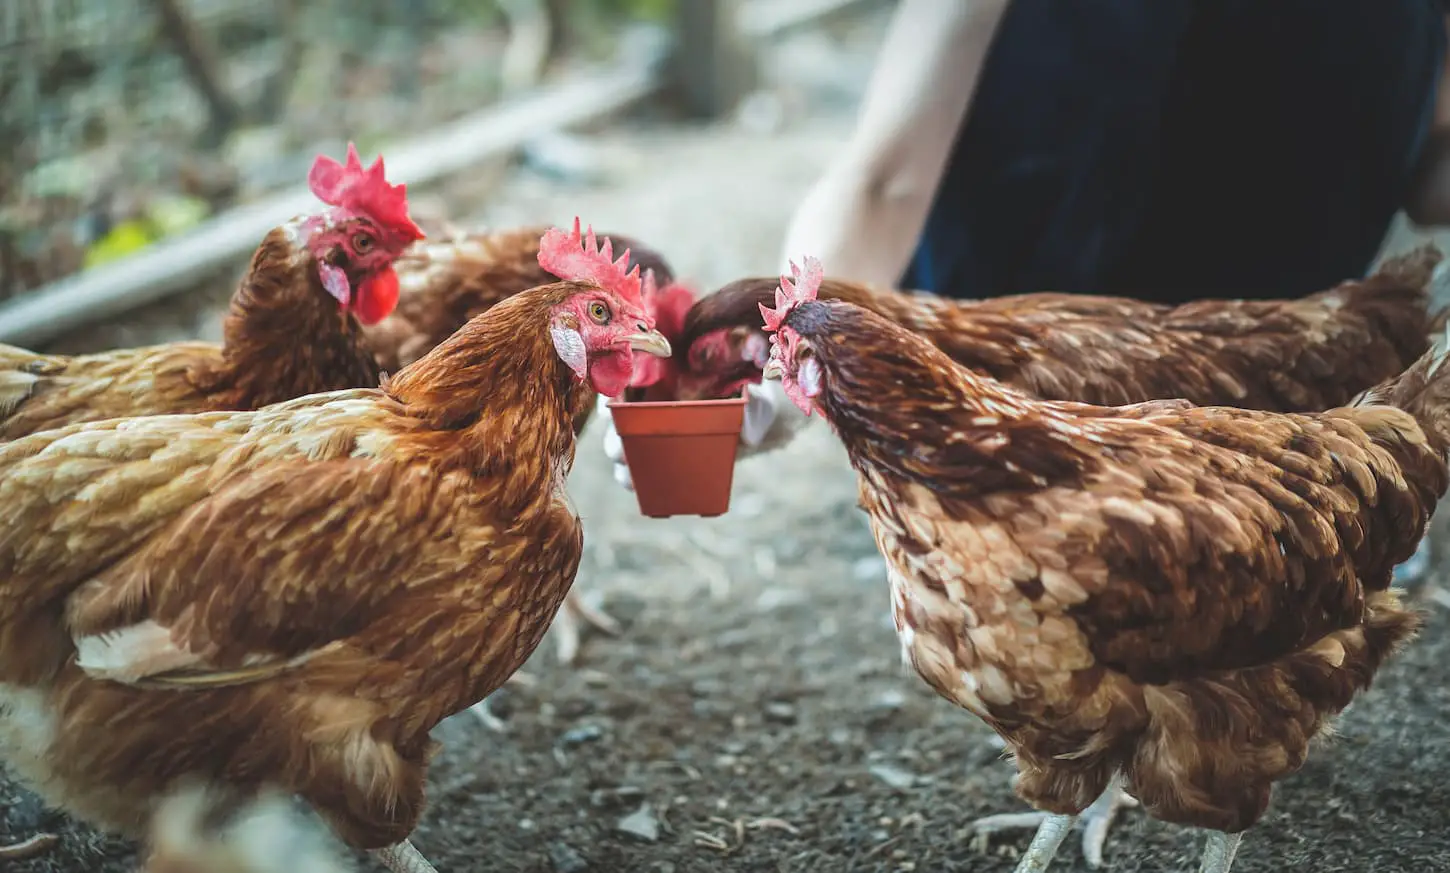 10 Clever Ways to Keep Chickens from Wasting Food